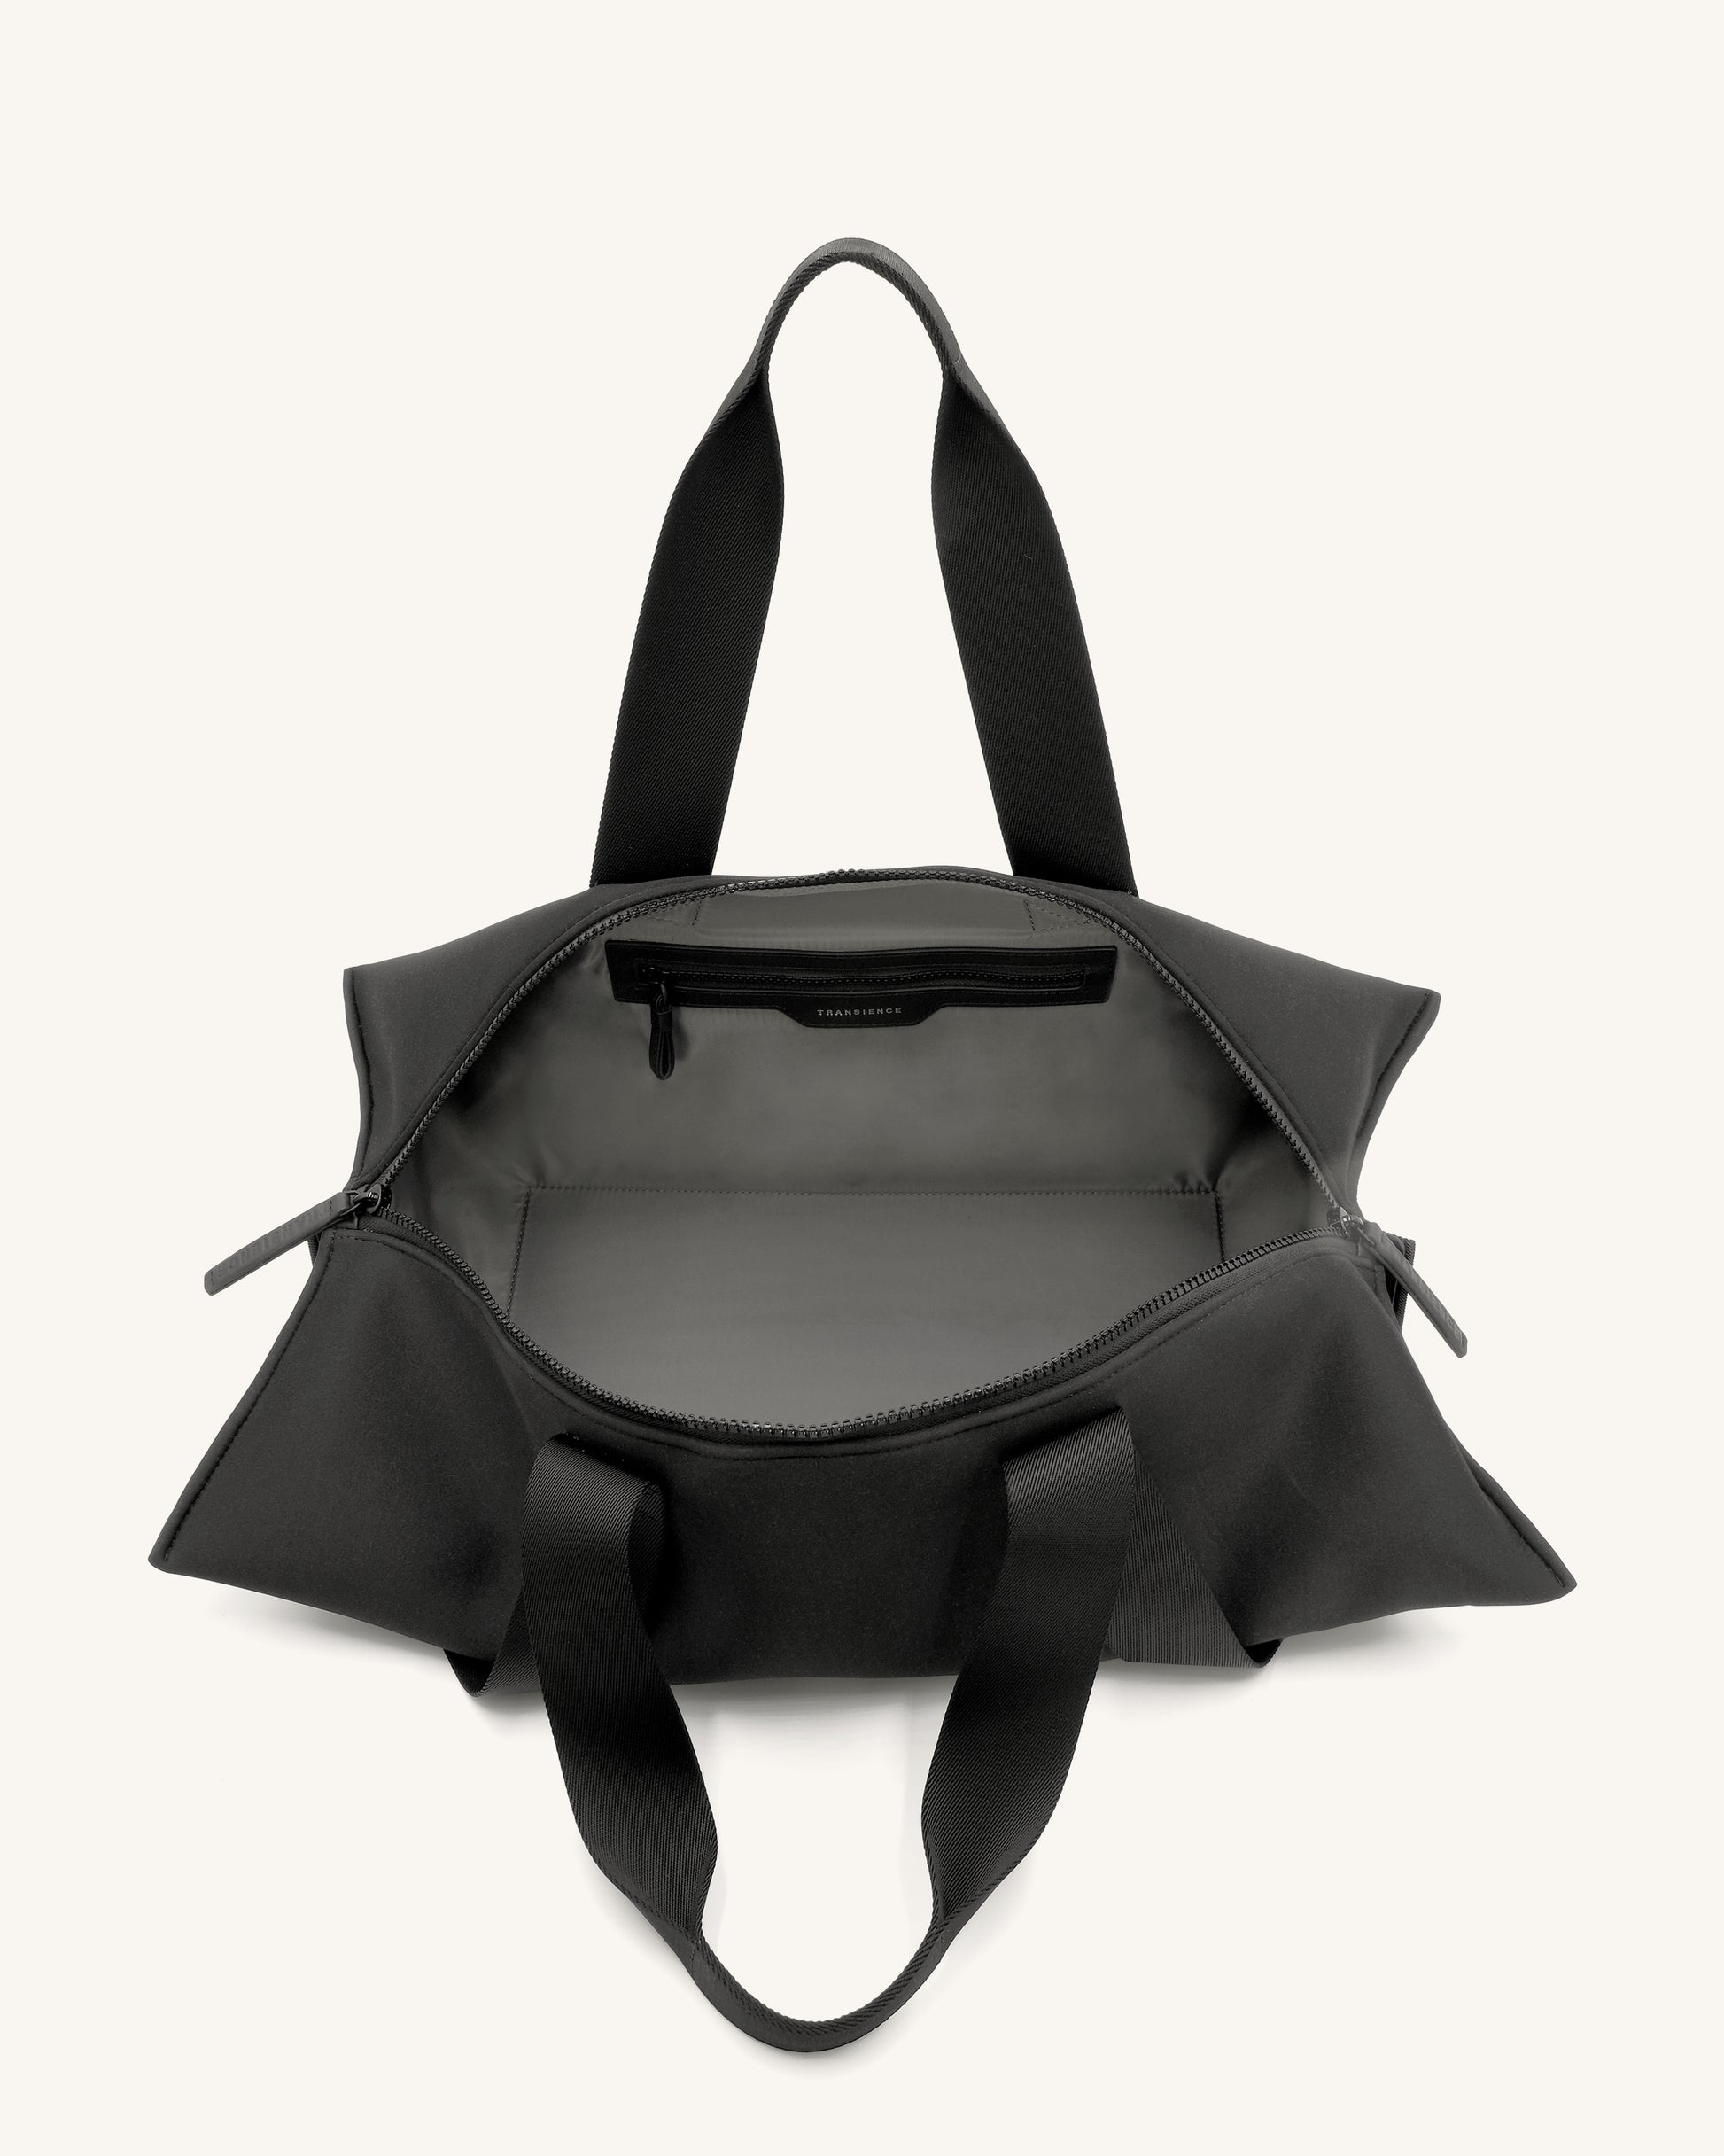 Leather Drawstring Bag for Women and Men Black Leather Yoga 